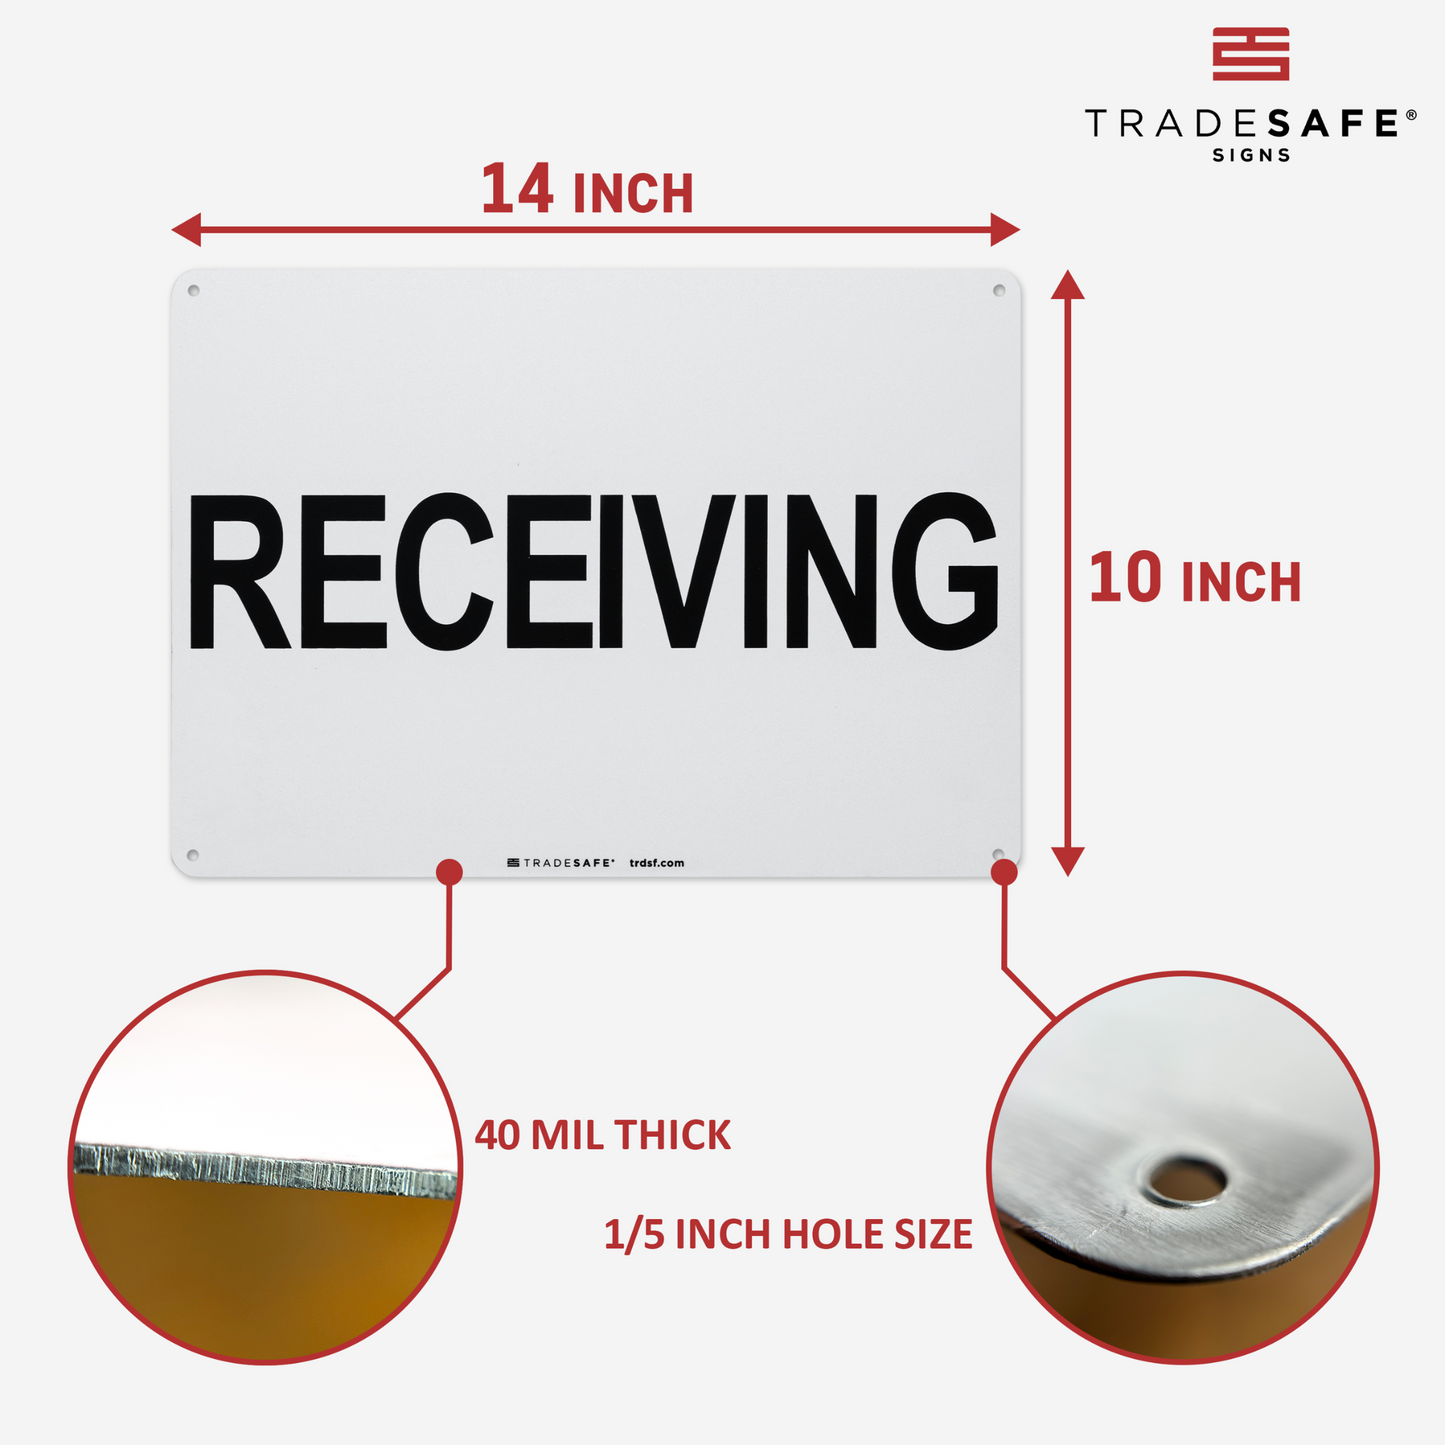 dimensions of receiving sign